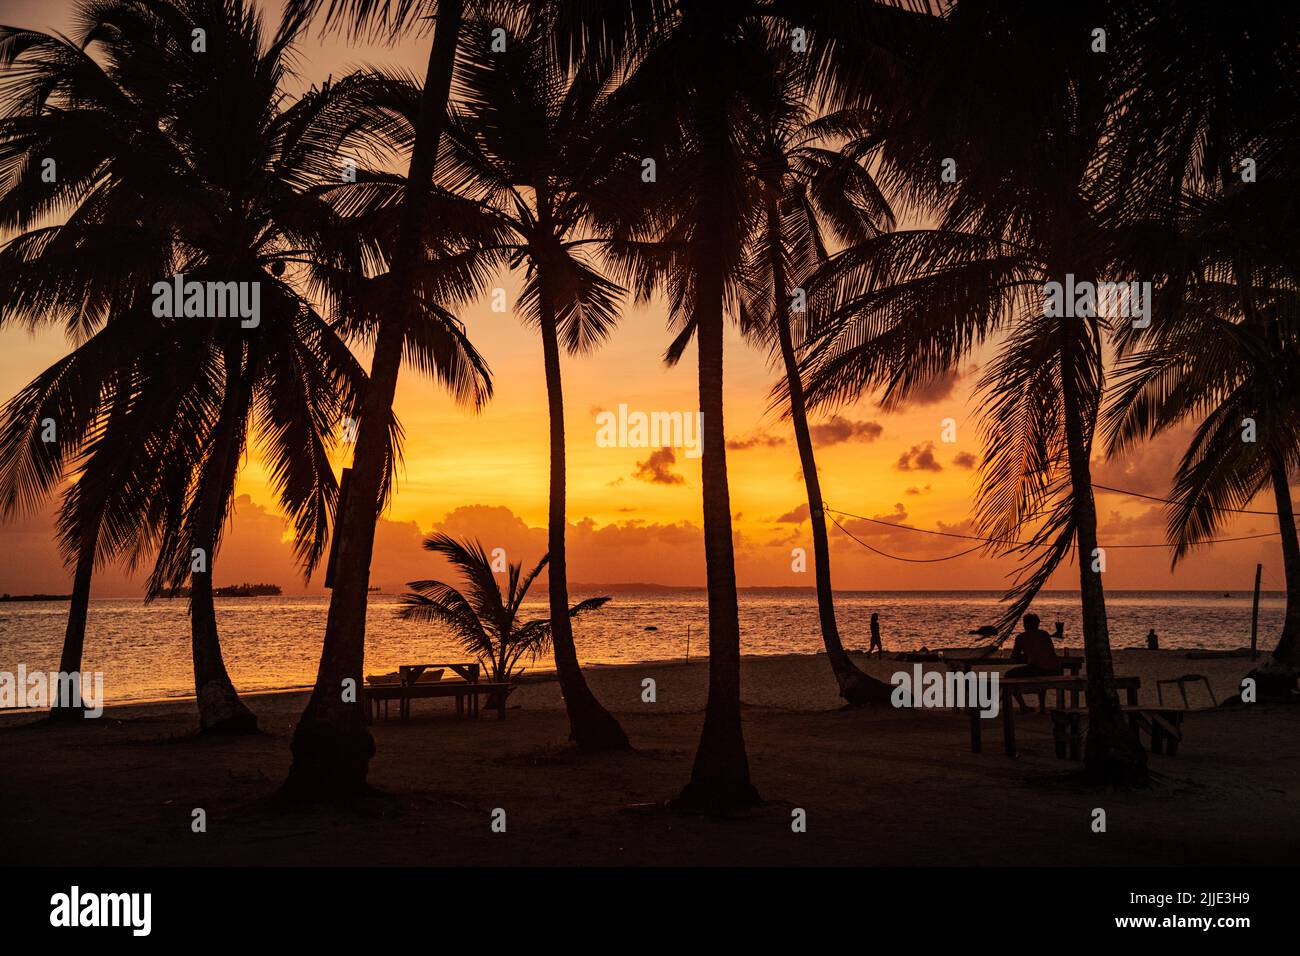 A sunset view in the San Blas Islands in Panama Stock Photo